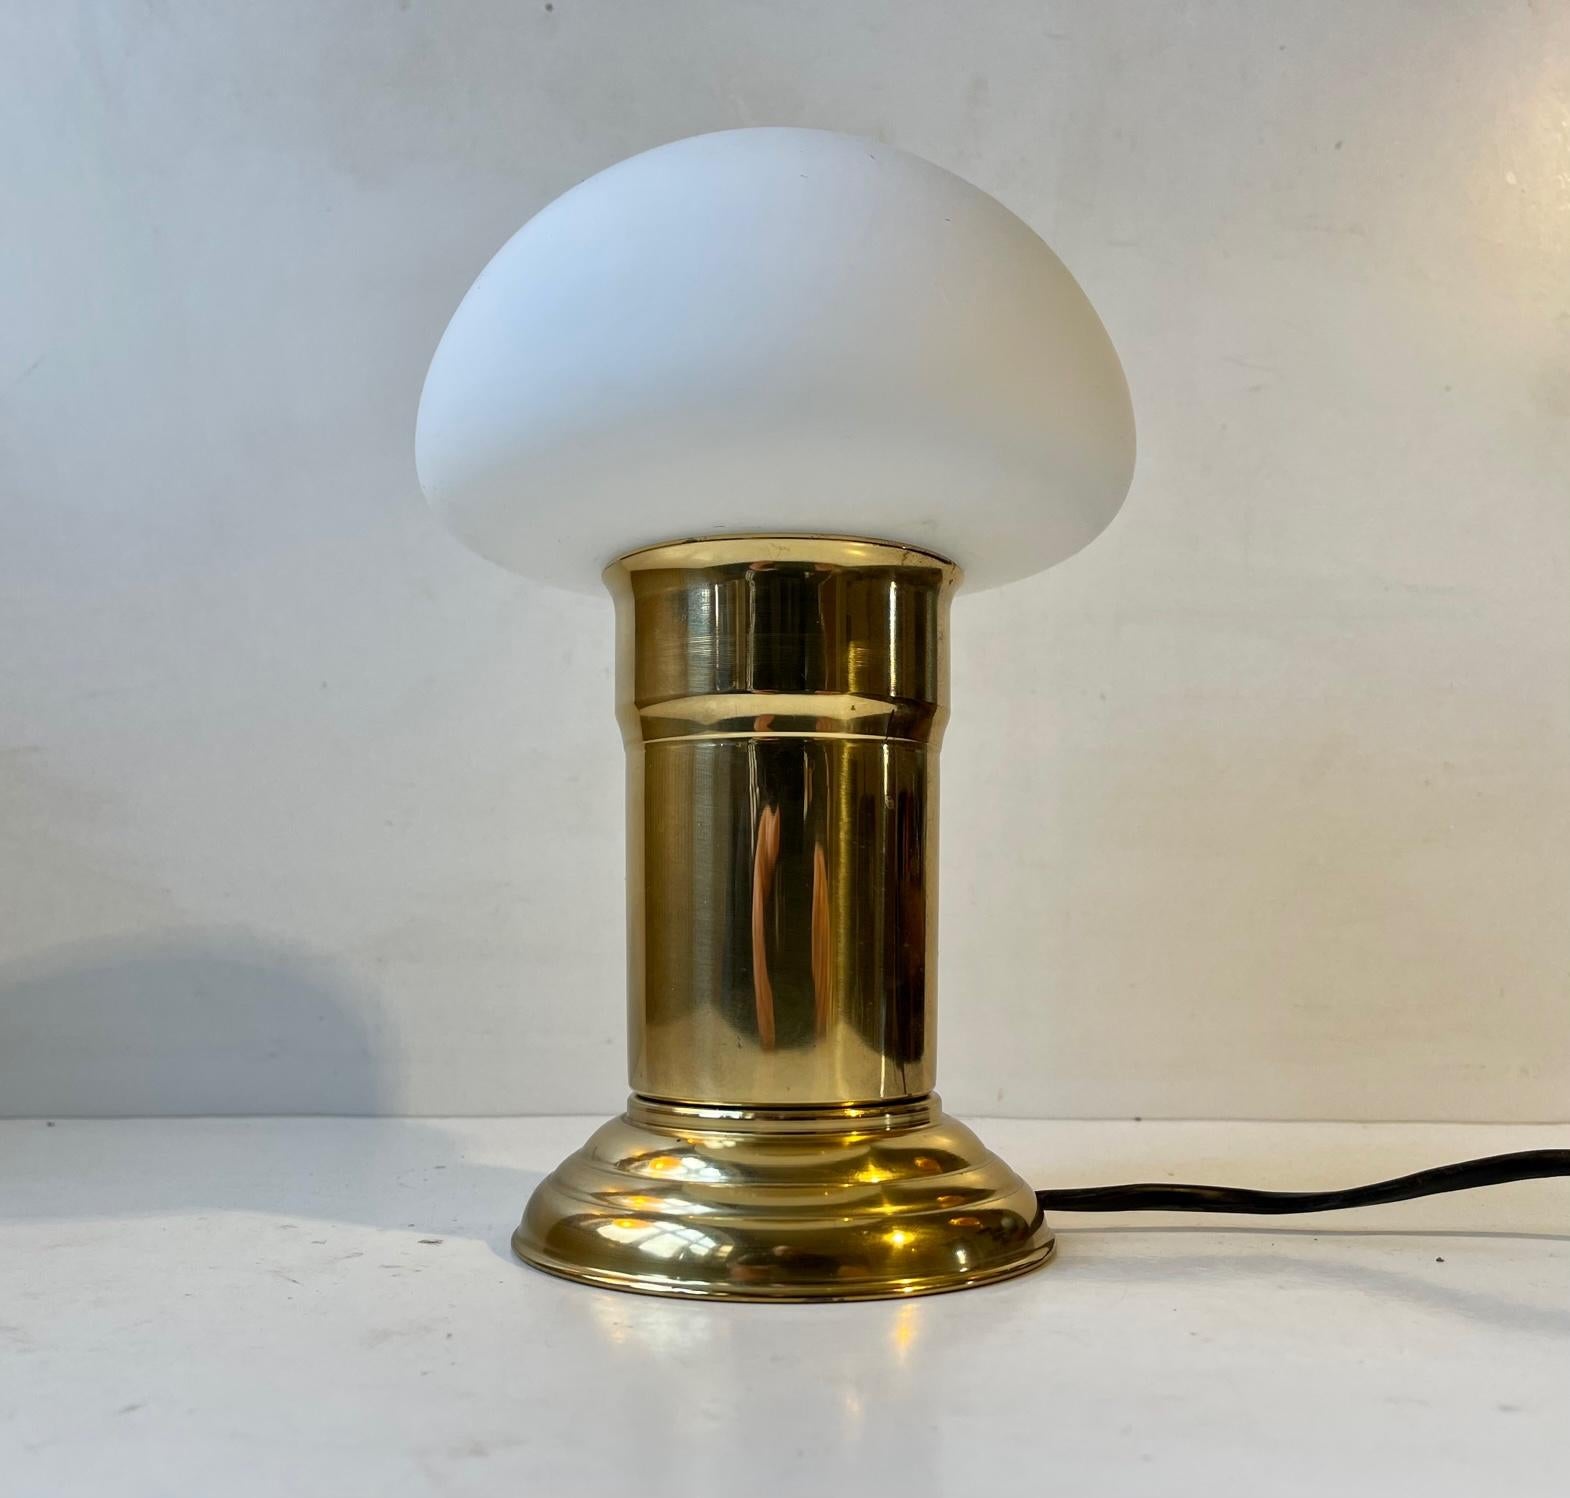 Scandinavian Mushroom Table Lamp in Brass and White Glass, 1970s For Sale 1